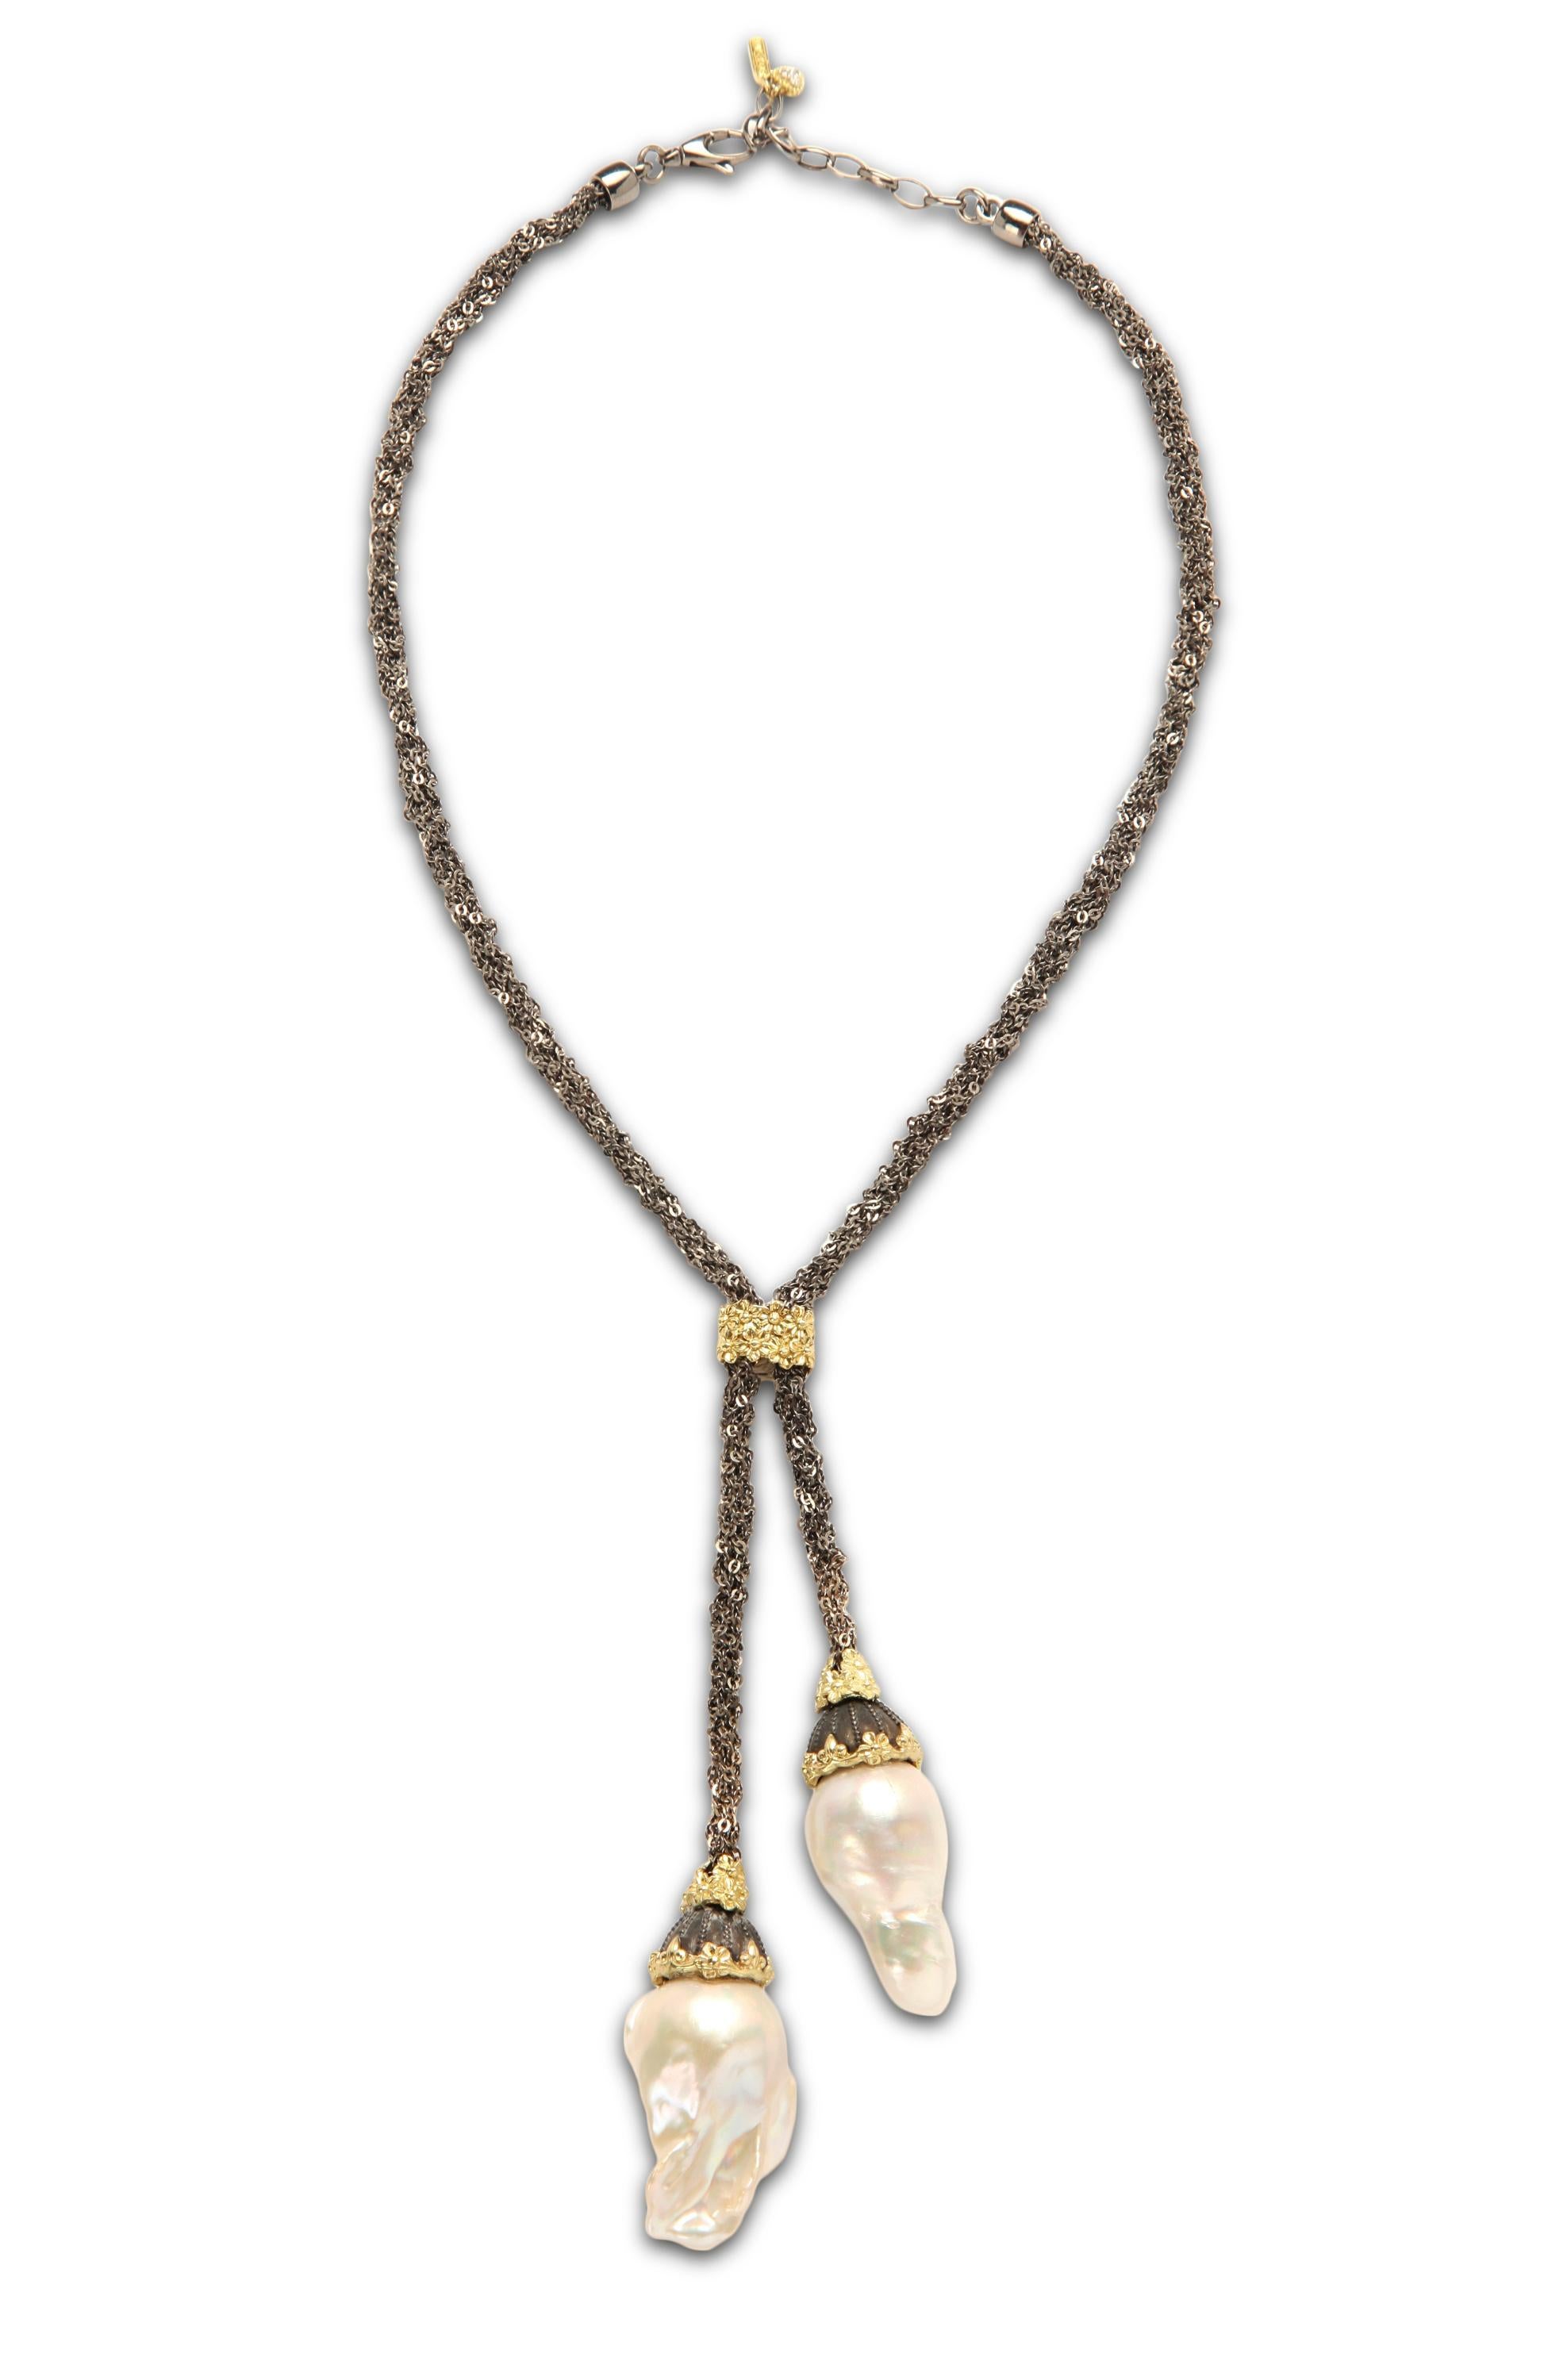 Darkened Aged Silver and 18K Gold Lariat Necklace with Two Baroque Pearl Drops by Stambolian

This unique necklaces features a gorgeous mesh type chain that is connected in the center by a gold floral design

The design leads to two drops with fresh